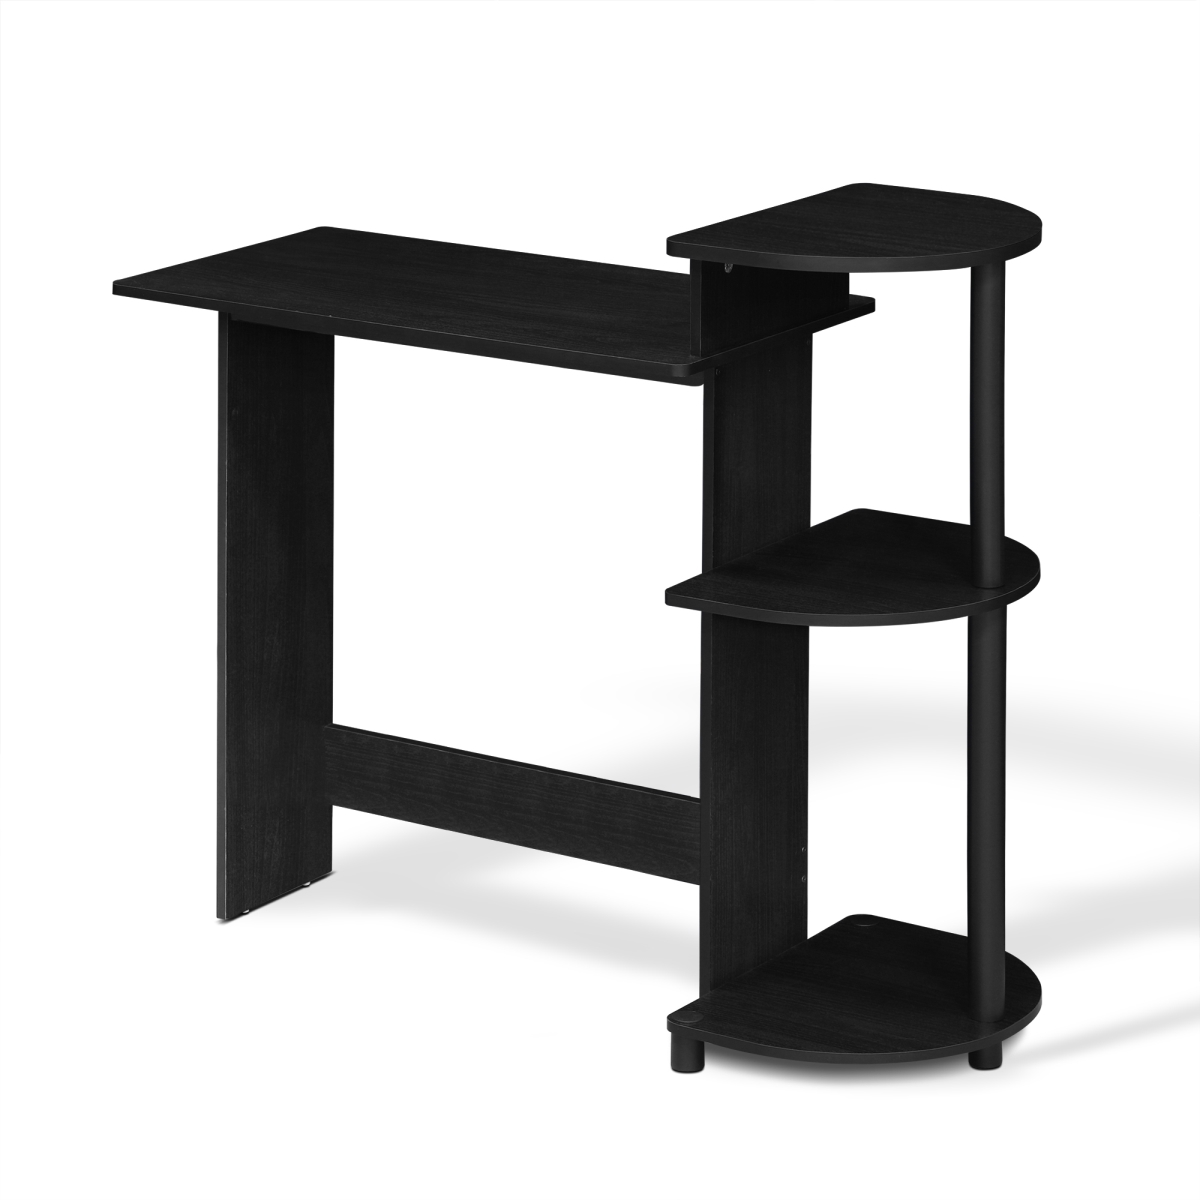 11181am-bk Compact Computer Desk With Shelves, Americano & Black - 39 X 15.5 X 33.6 In.